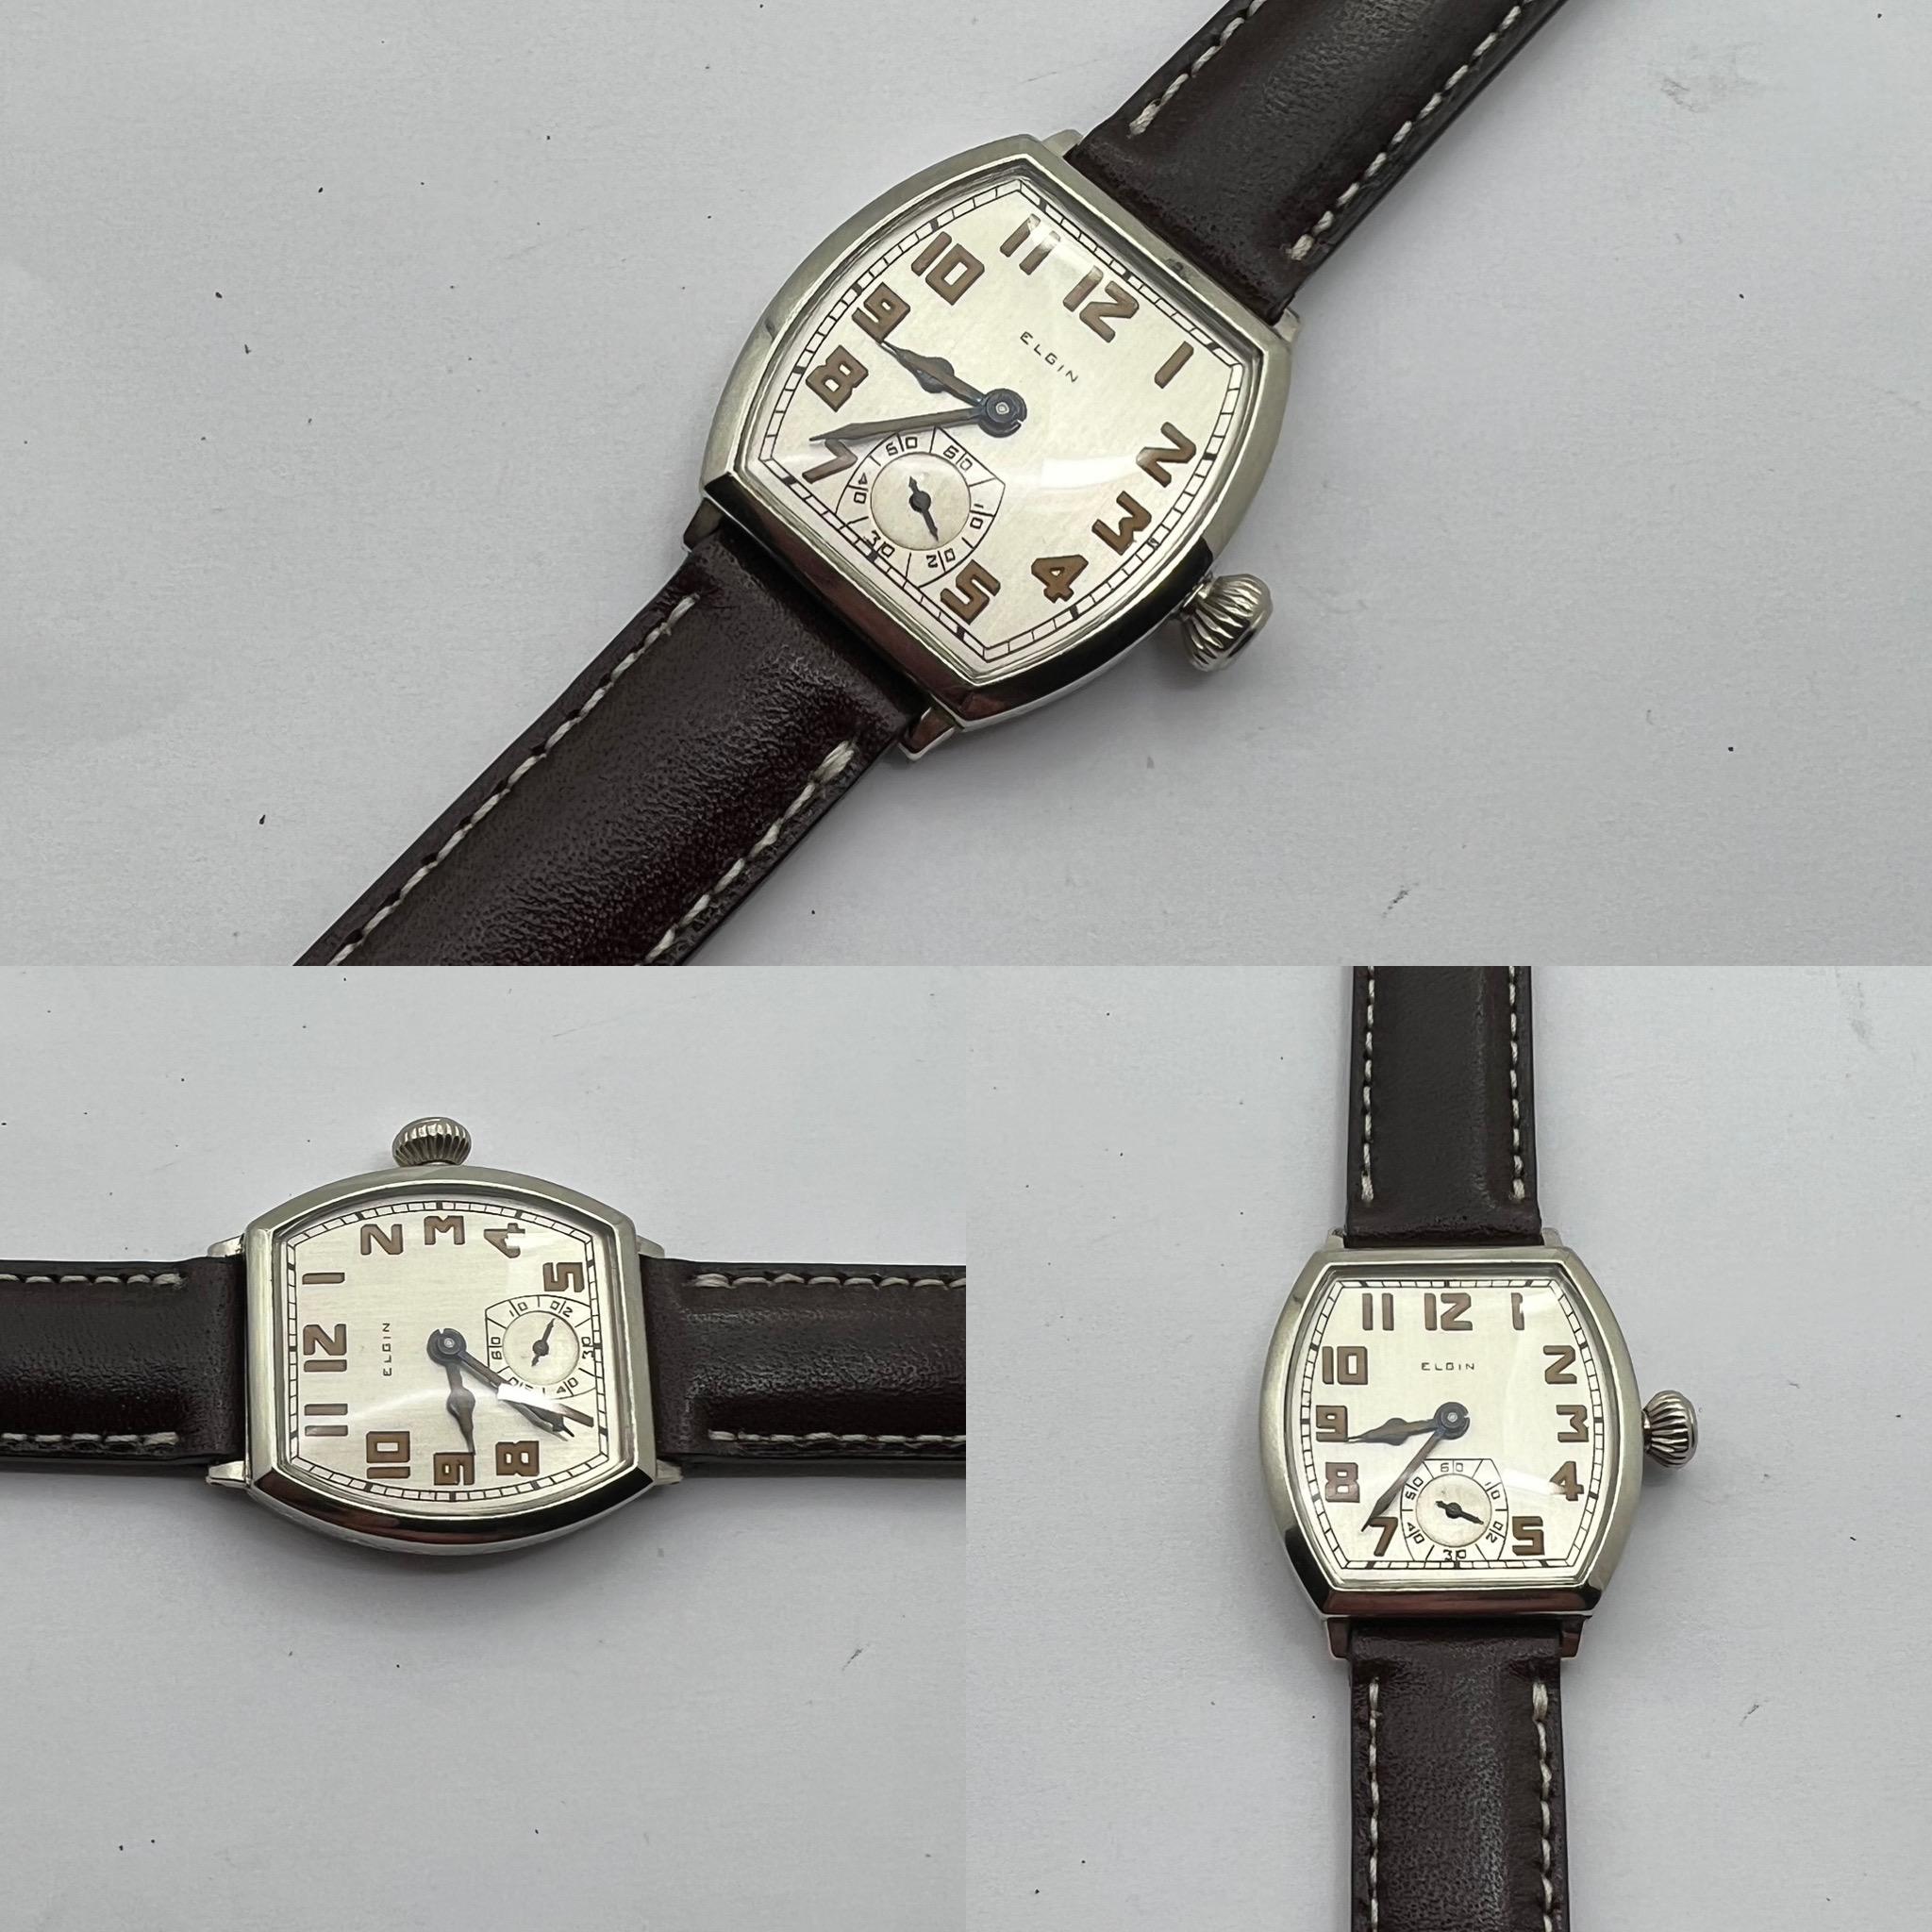 What a beautiful watch. This 1920’s Men’s Elgin has been restored from the ground up. The 7 jewel movement purrs like a kitten and keeps accurate time. It has recently had a complete service to insure consistent reliability.

This is a harder size